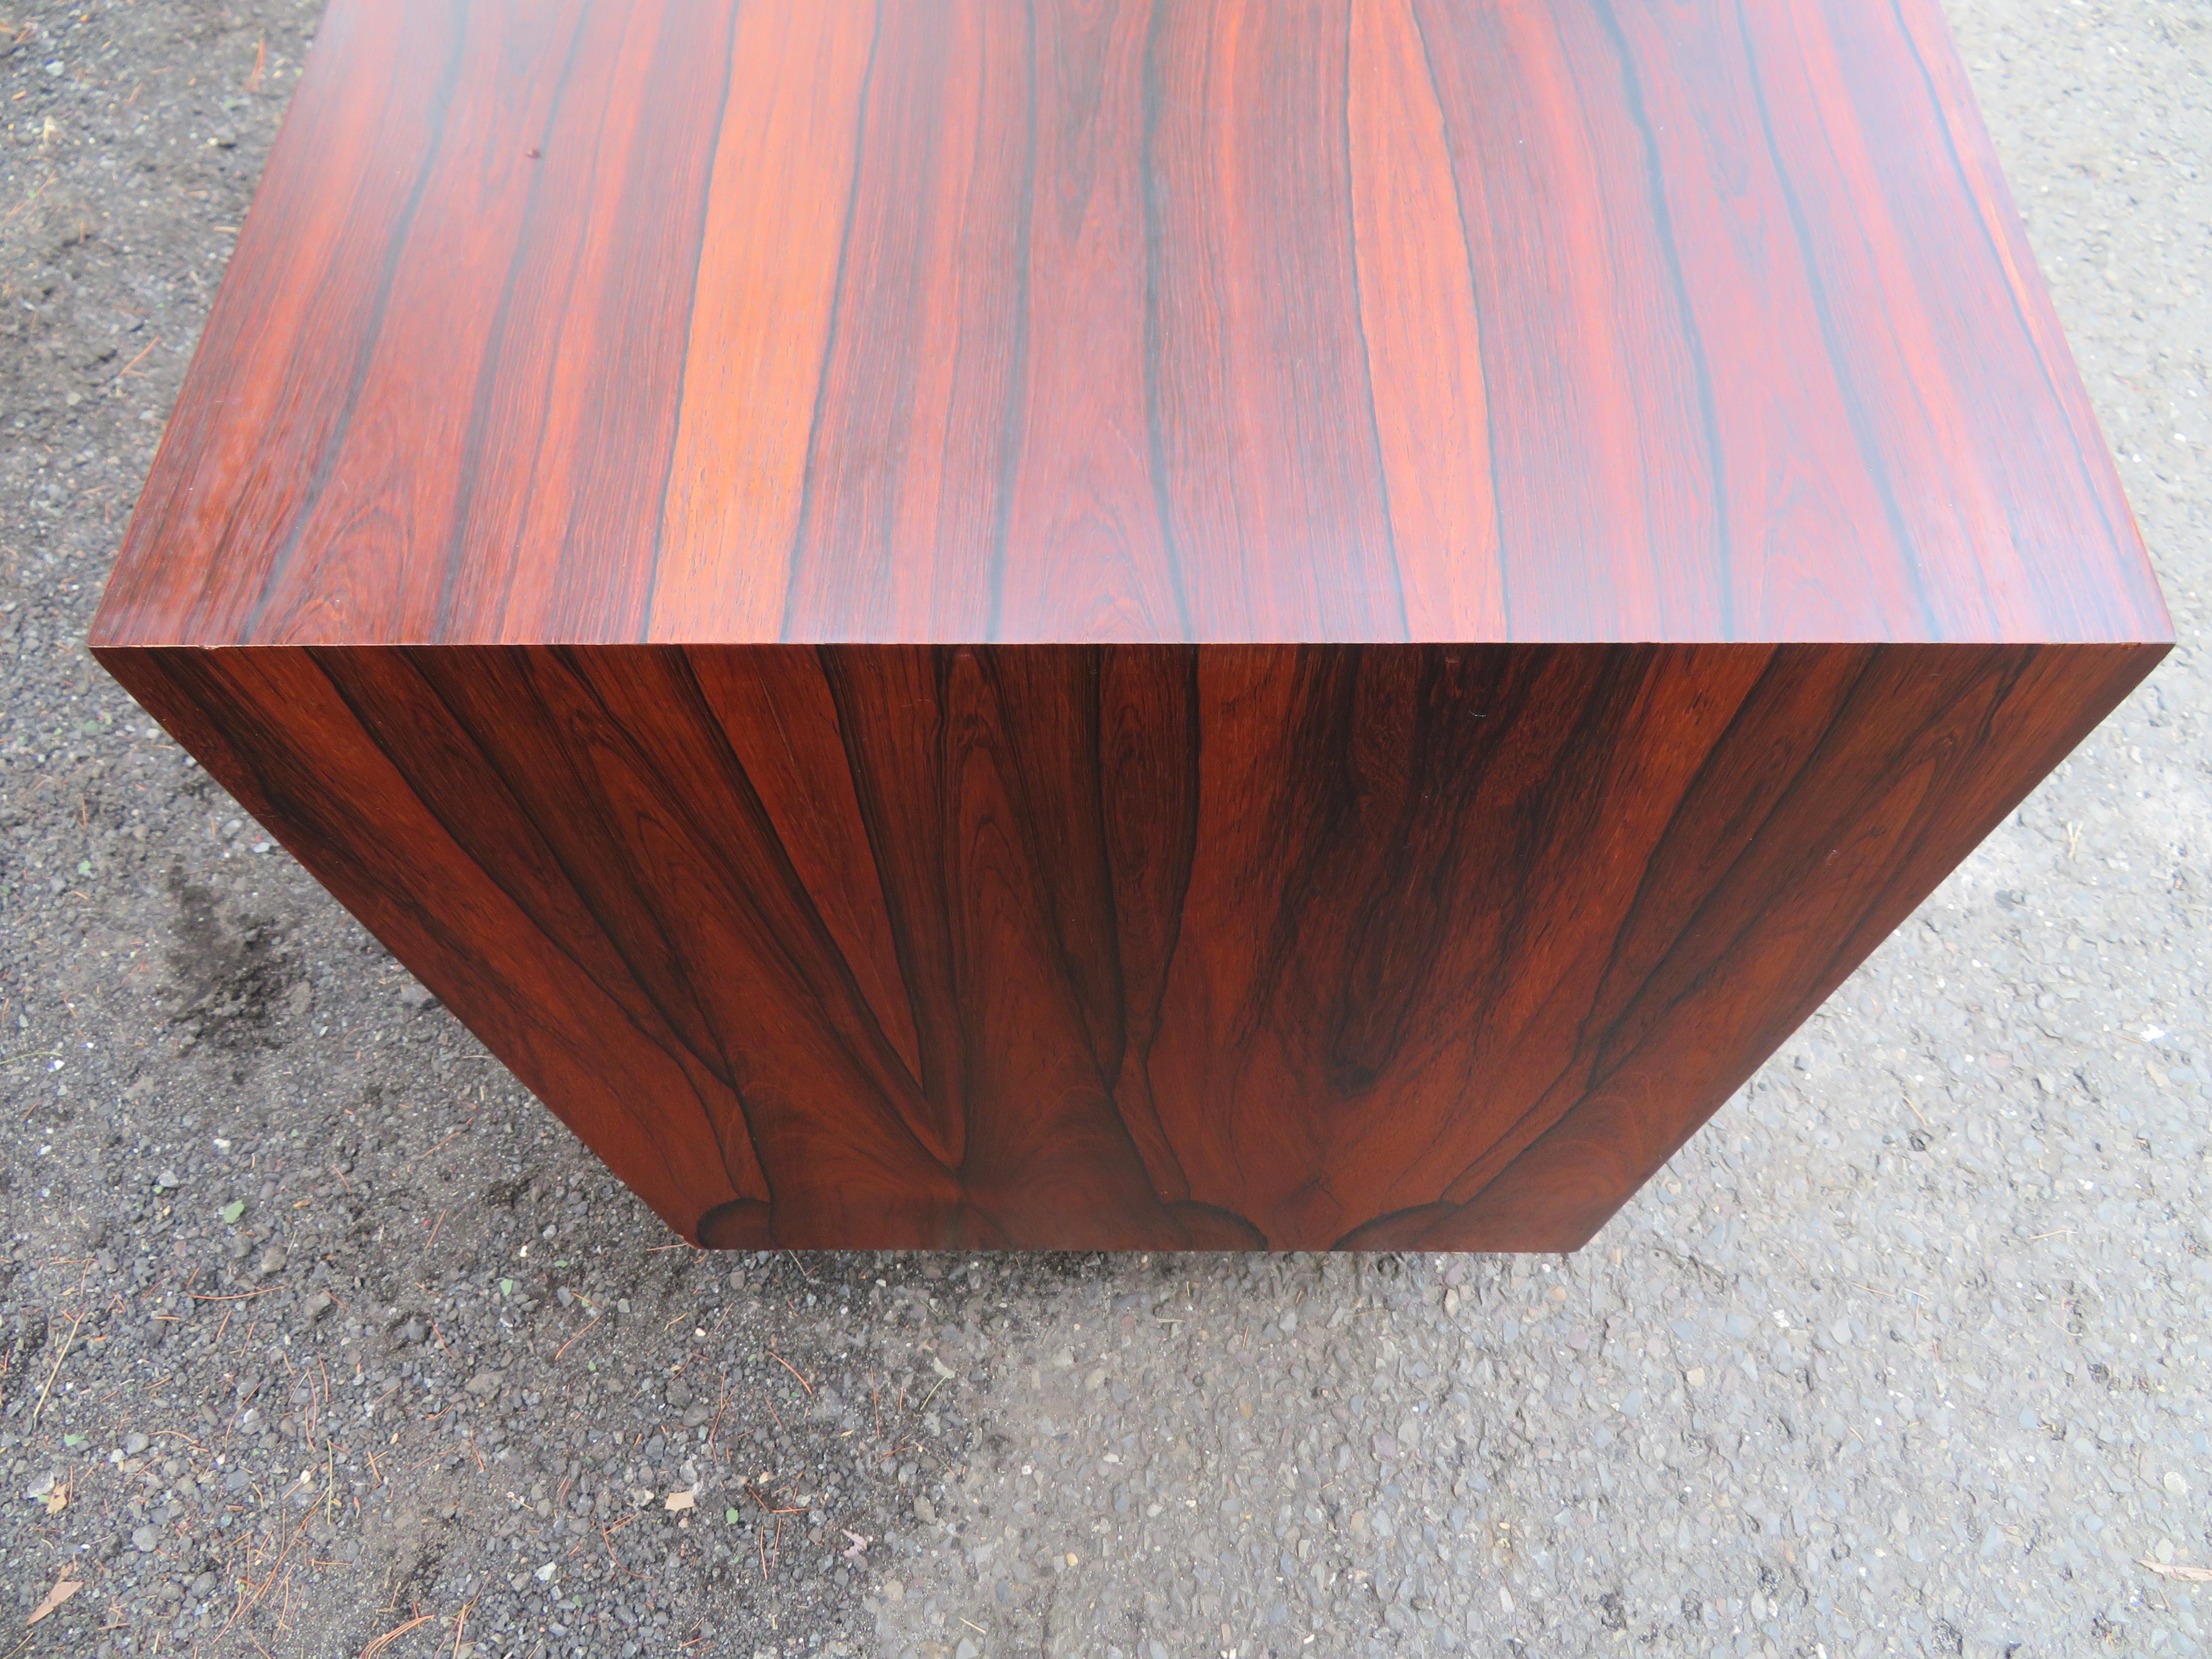 Lovely Petite Danish Modern Rosewood Bachelors Chest Mid-Century Modern In Good Condition For Sale In Pemberton, NJ